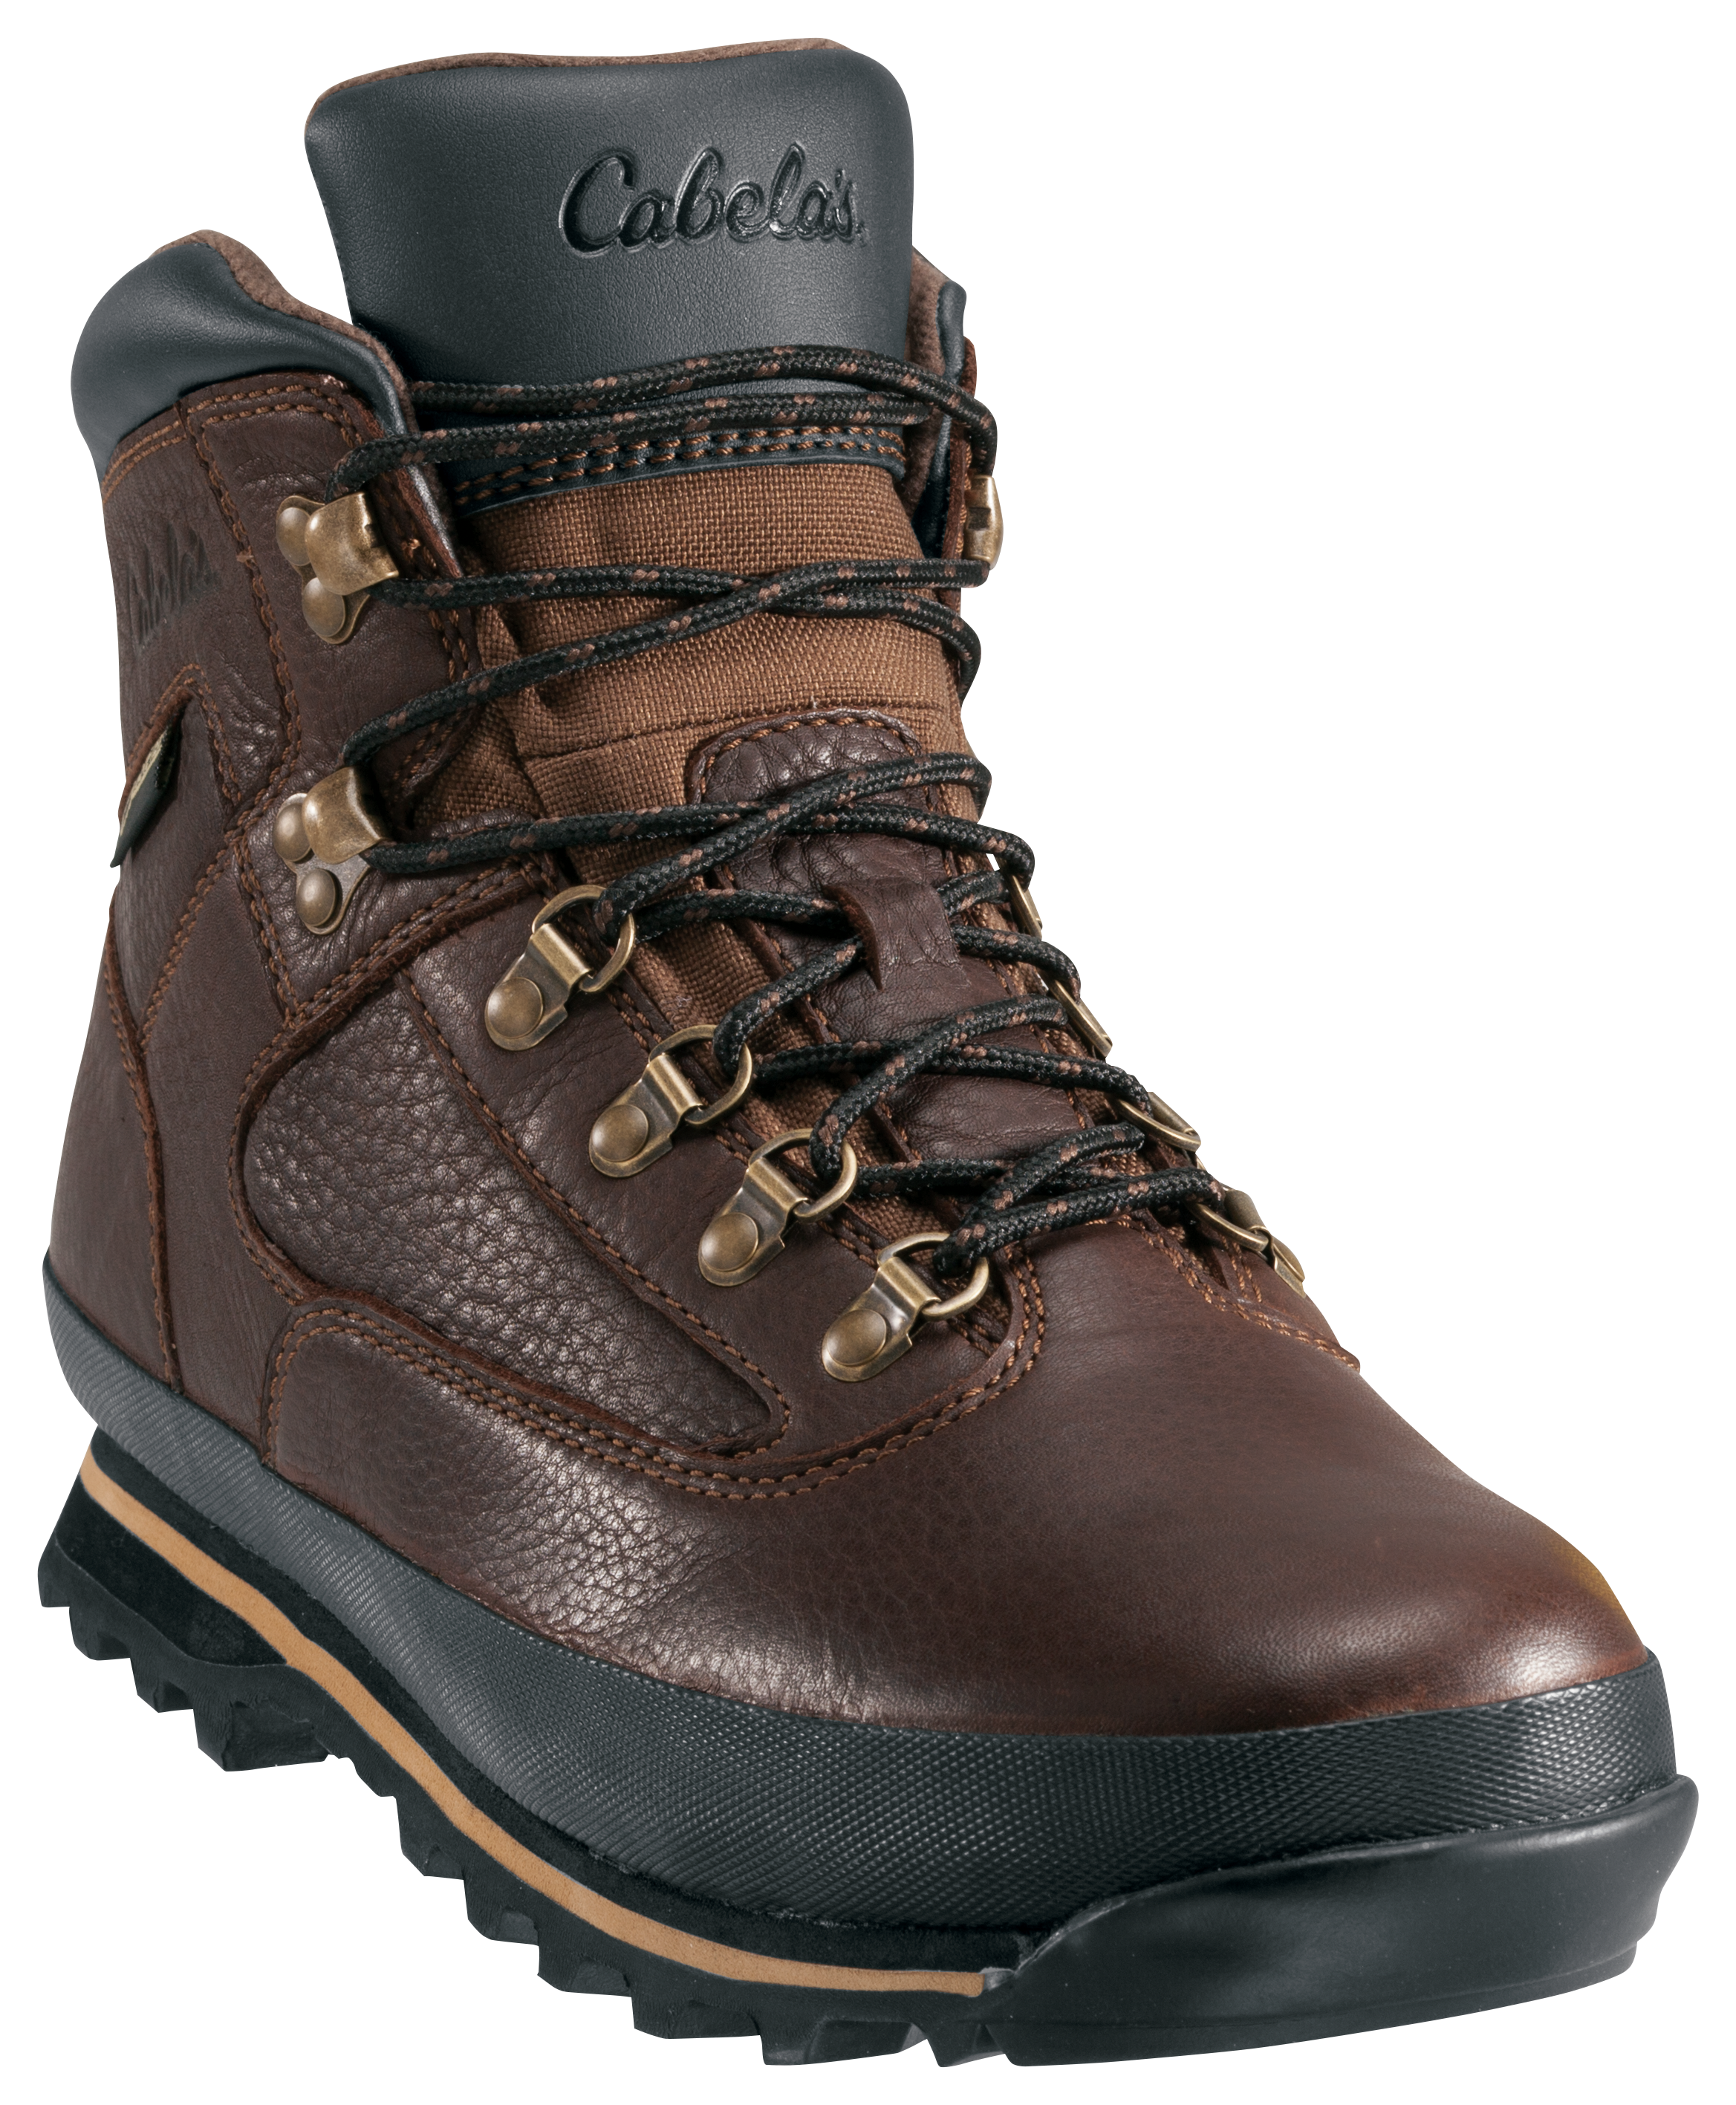 Cabela's Rimrock Mid GORE-TEX Hiking Boots for Men - Brown - 11.5W